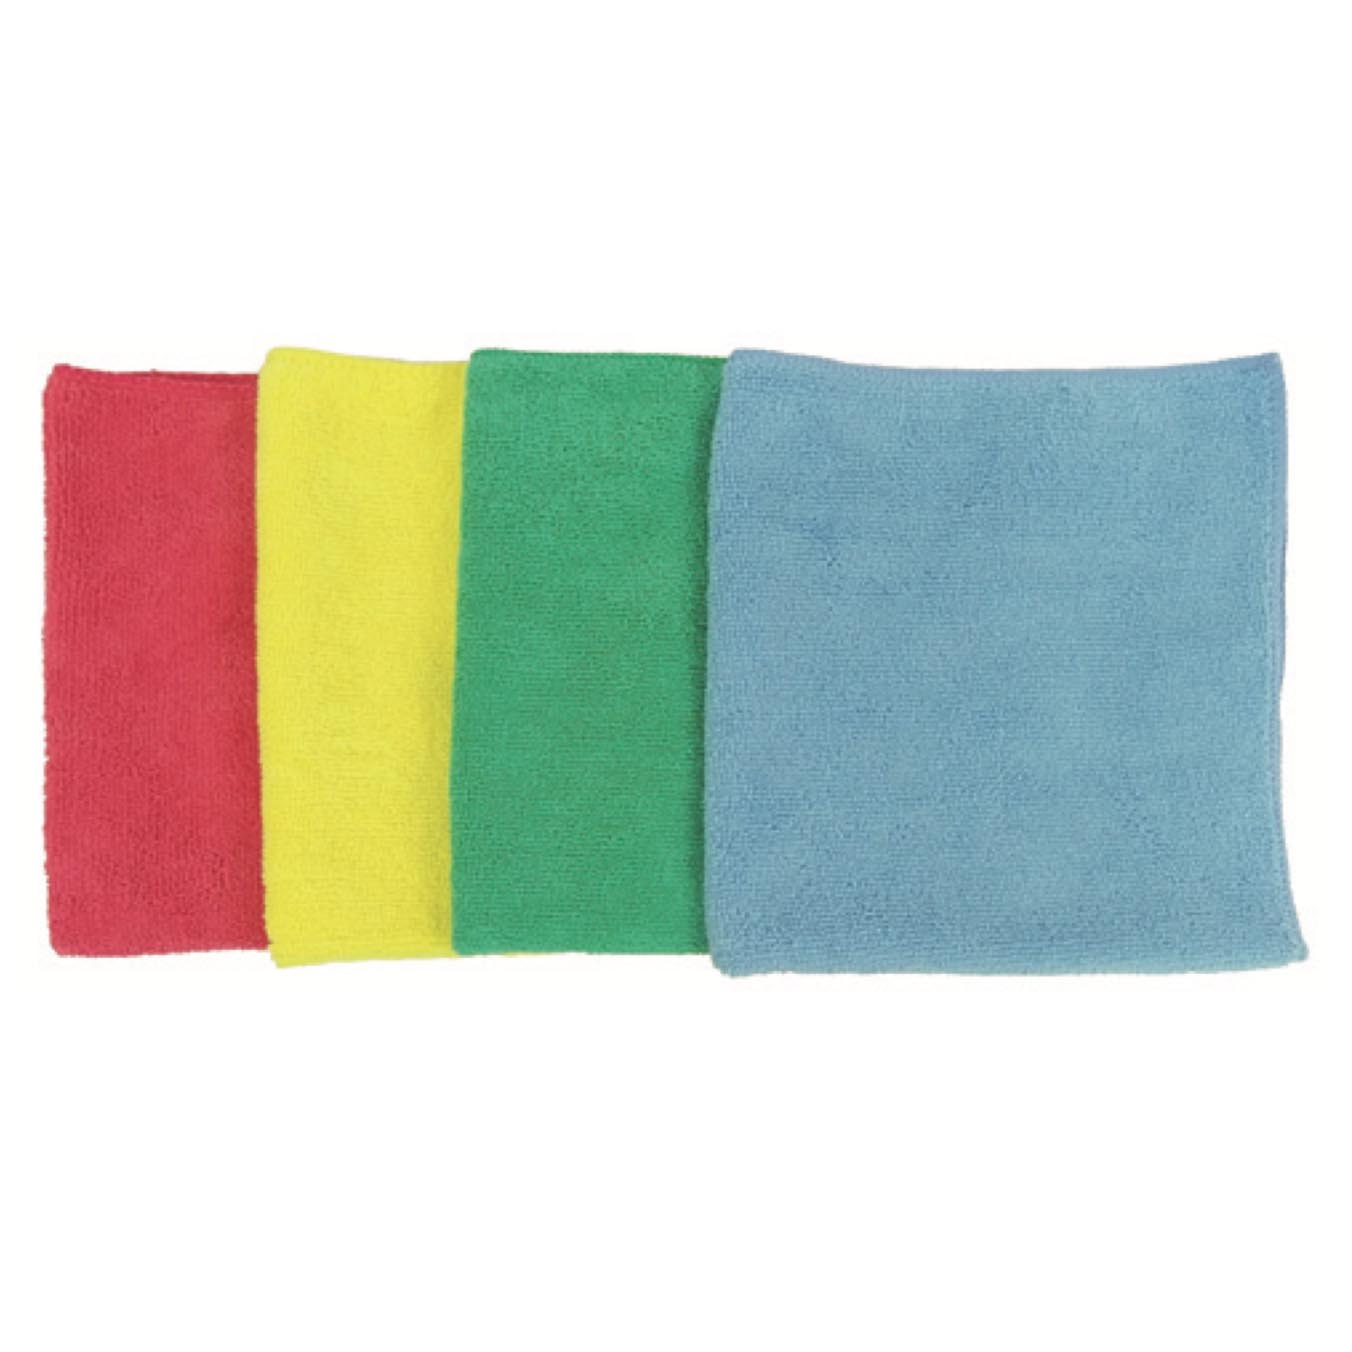 Microfiber Terry Cloths- Heavy Weight 400gsm